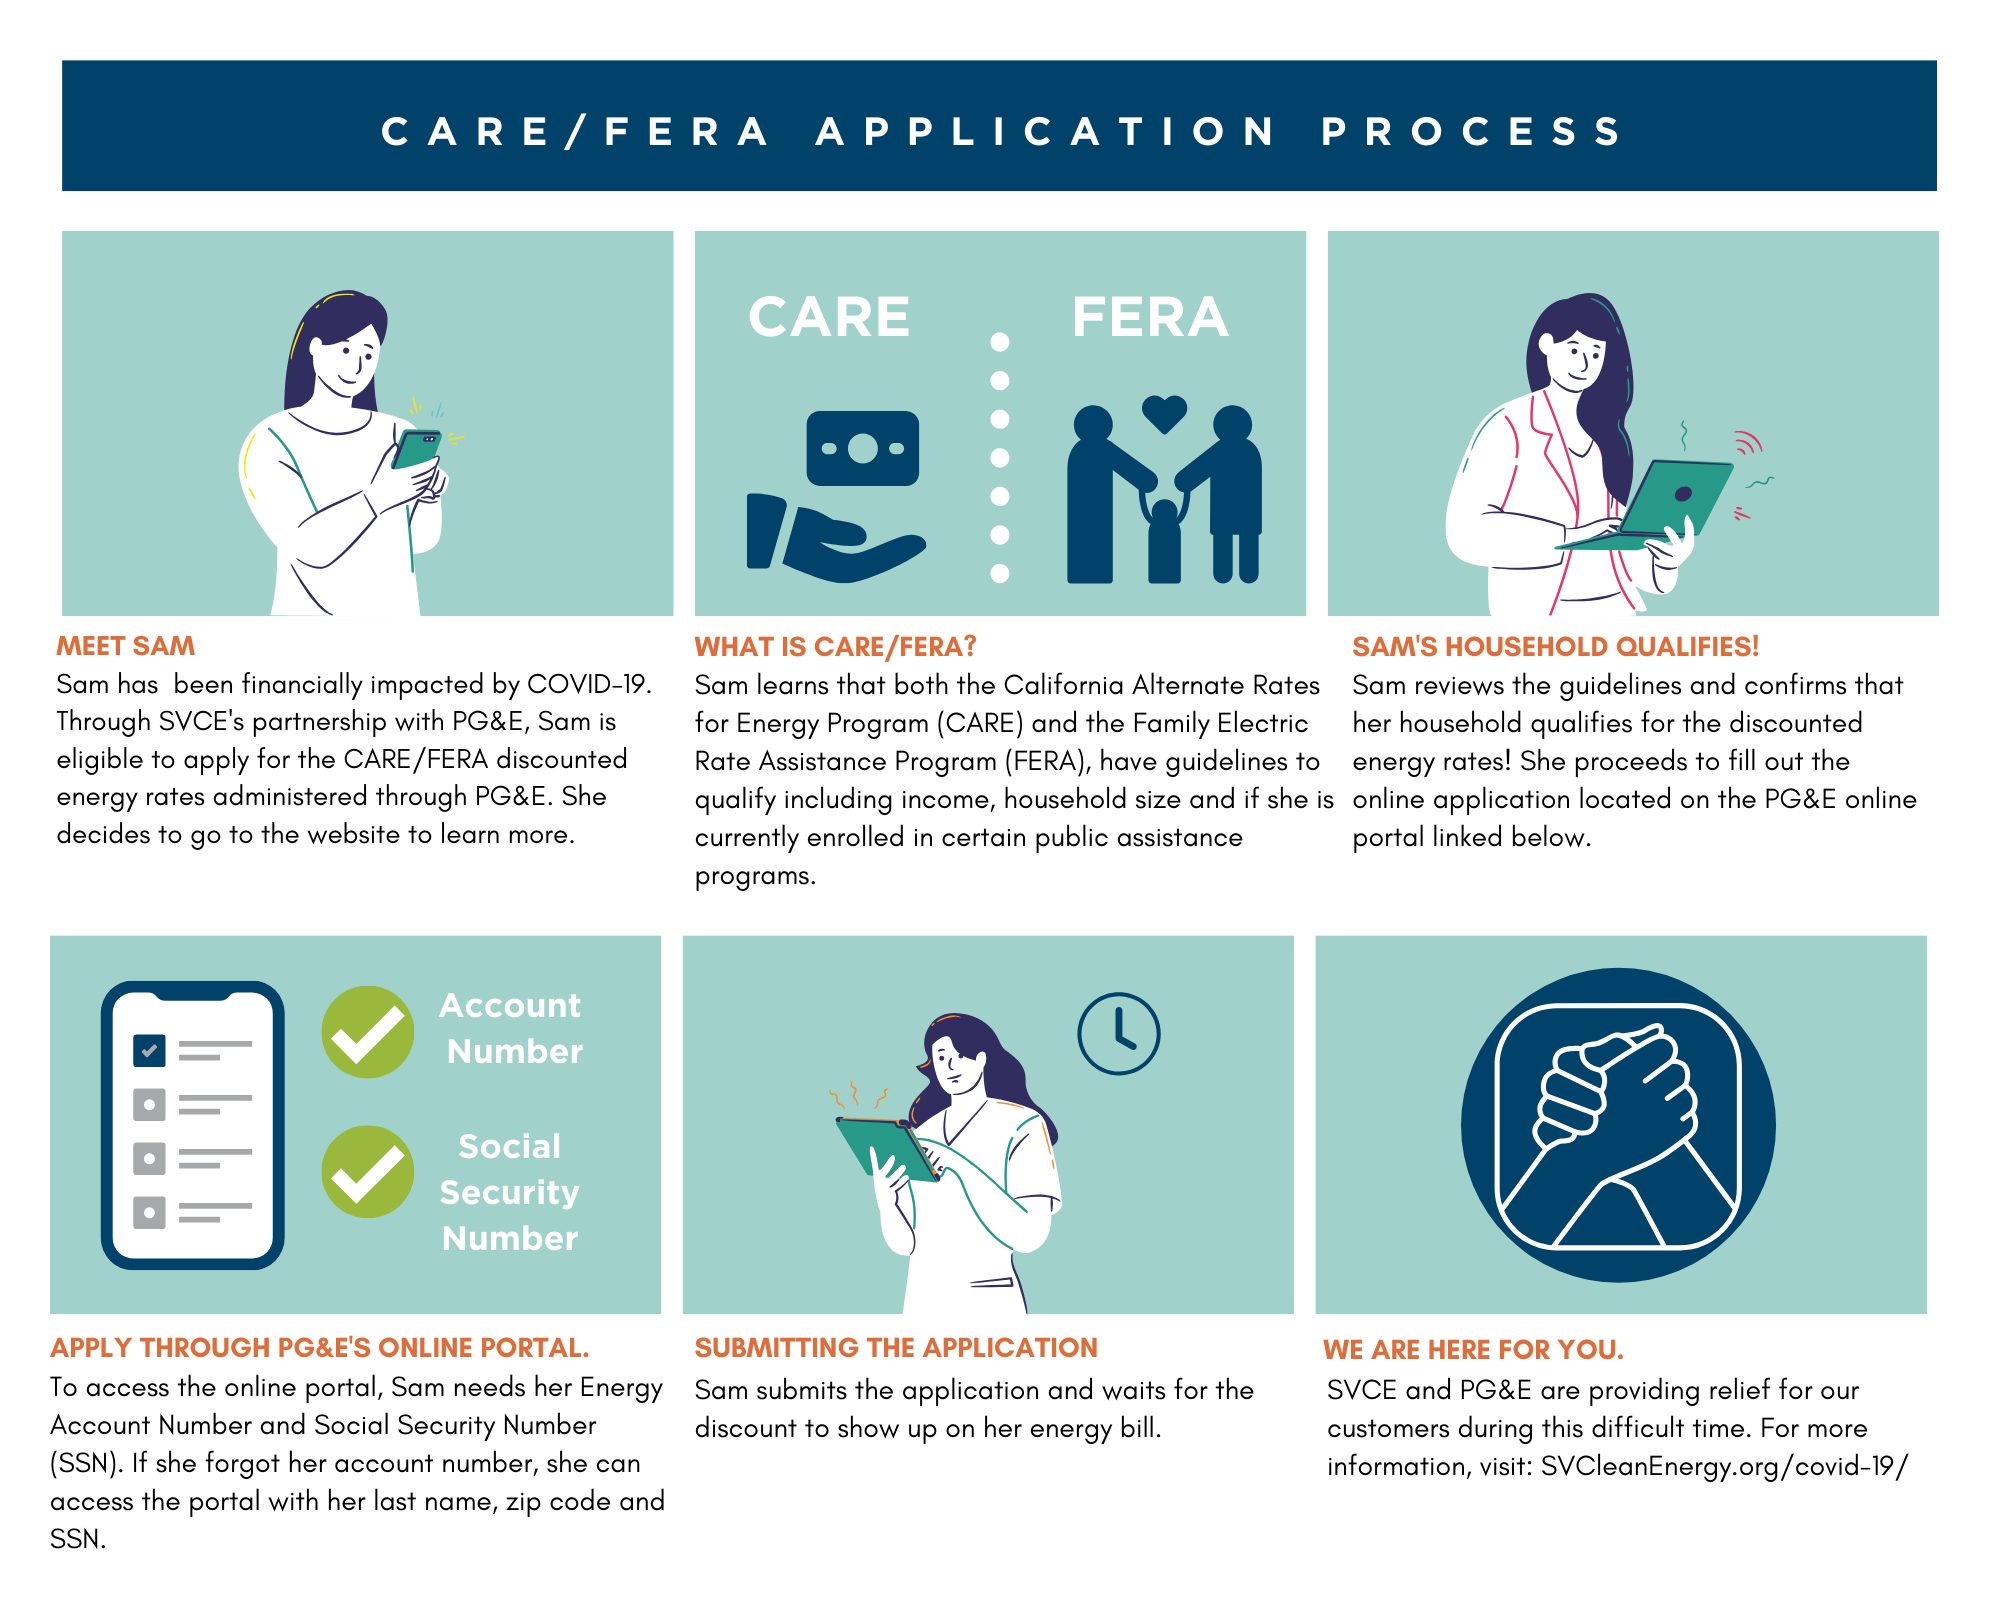 storyboard on how to sign up for CARE/FERA programs